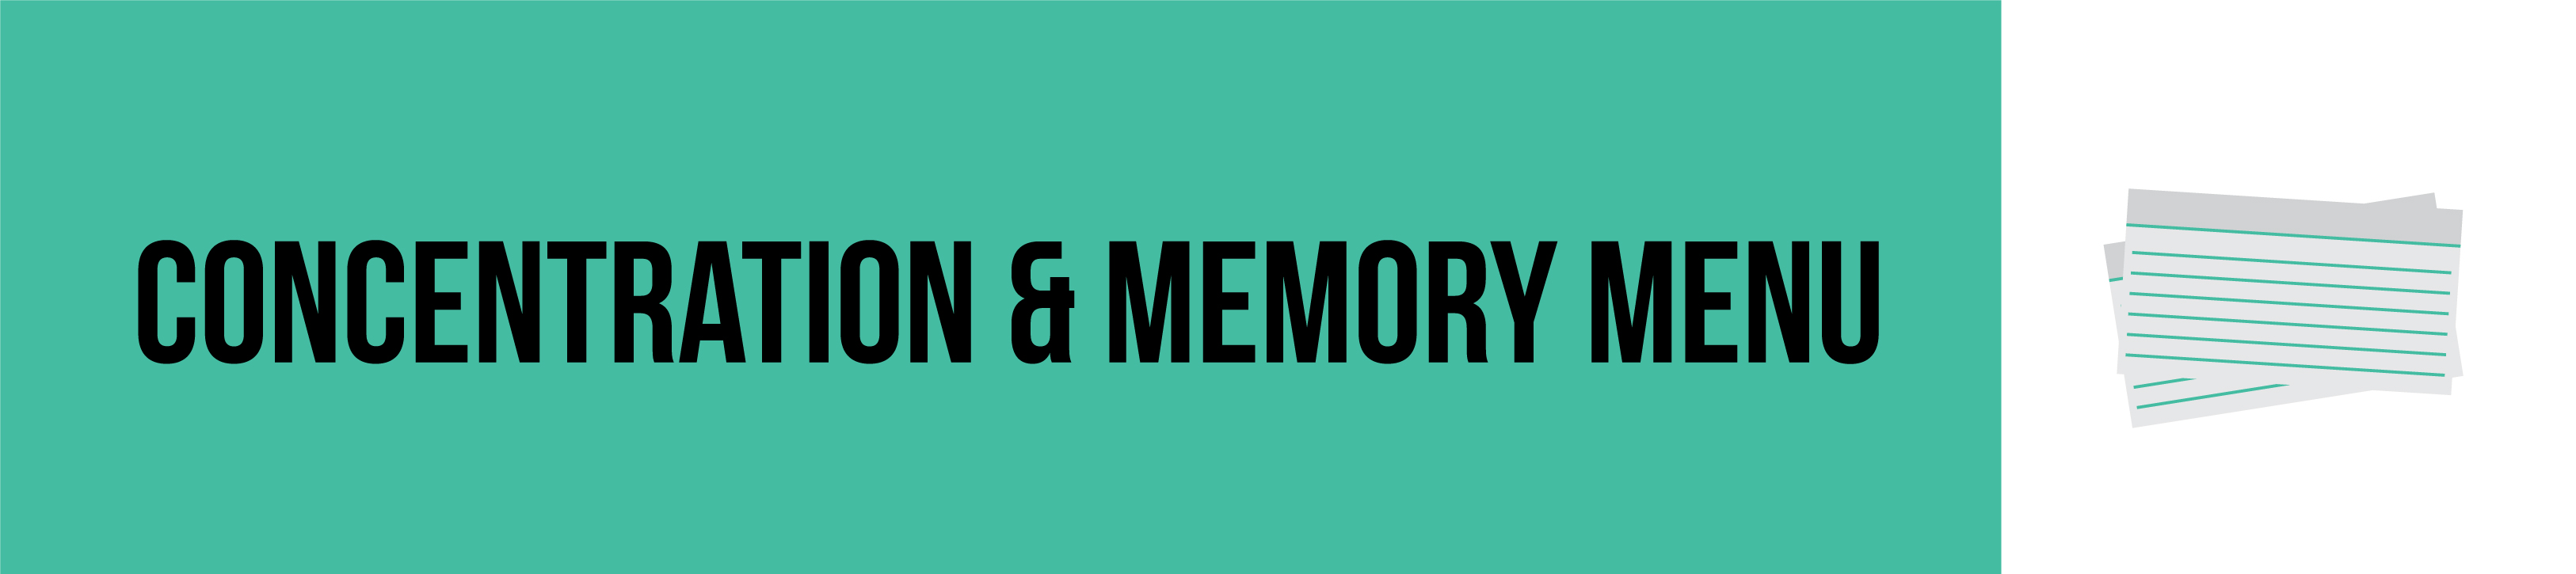 concentration and memory menu